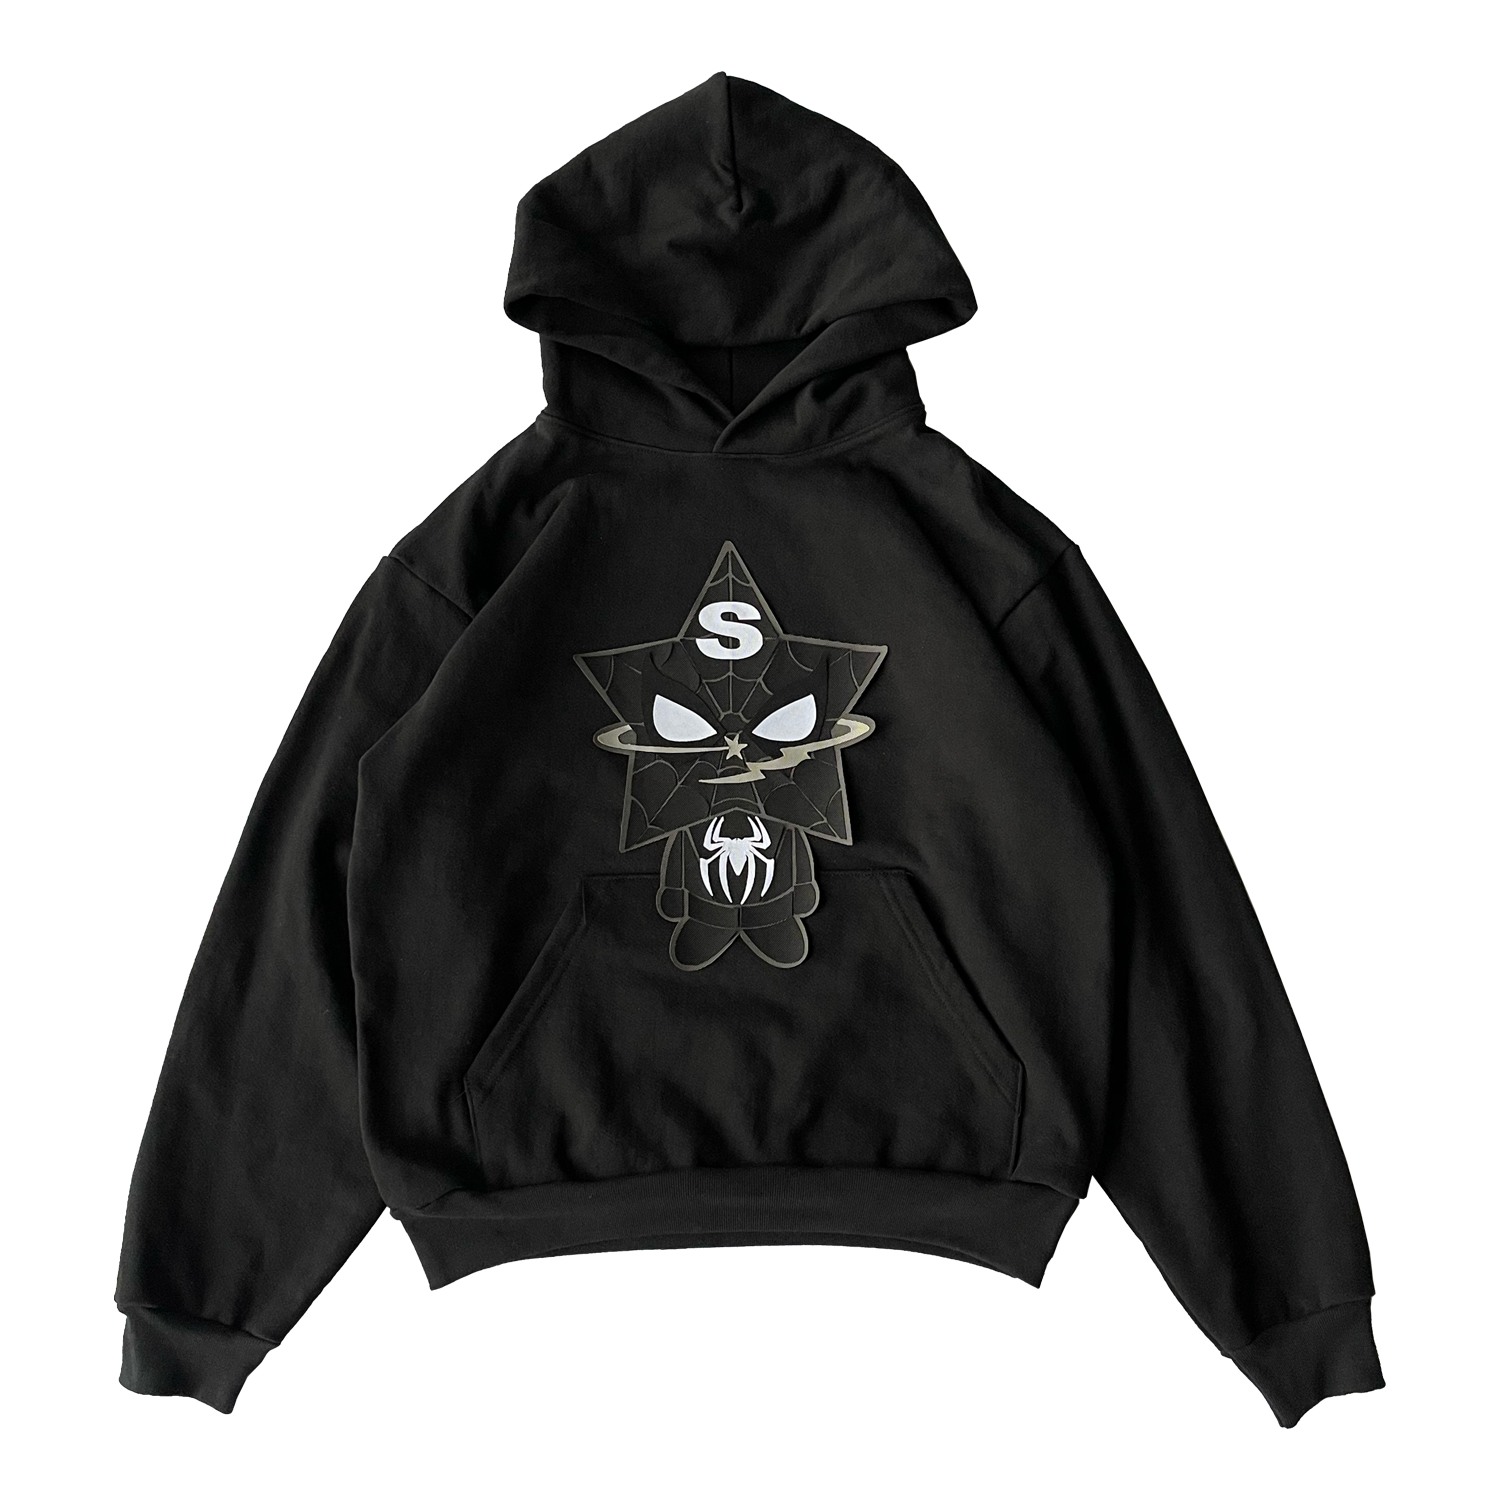 Infected Starboy Hoodie